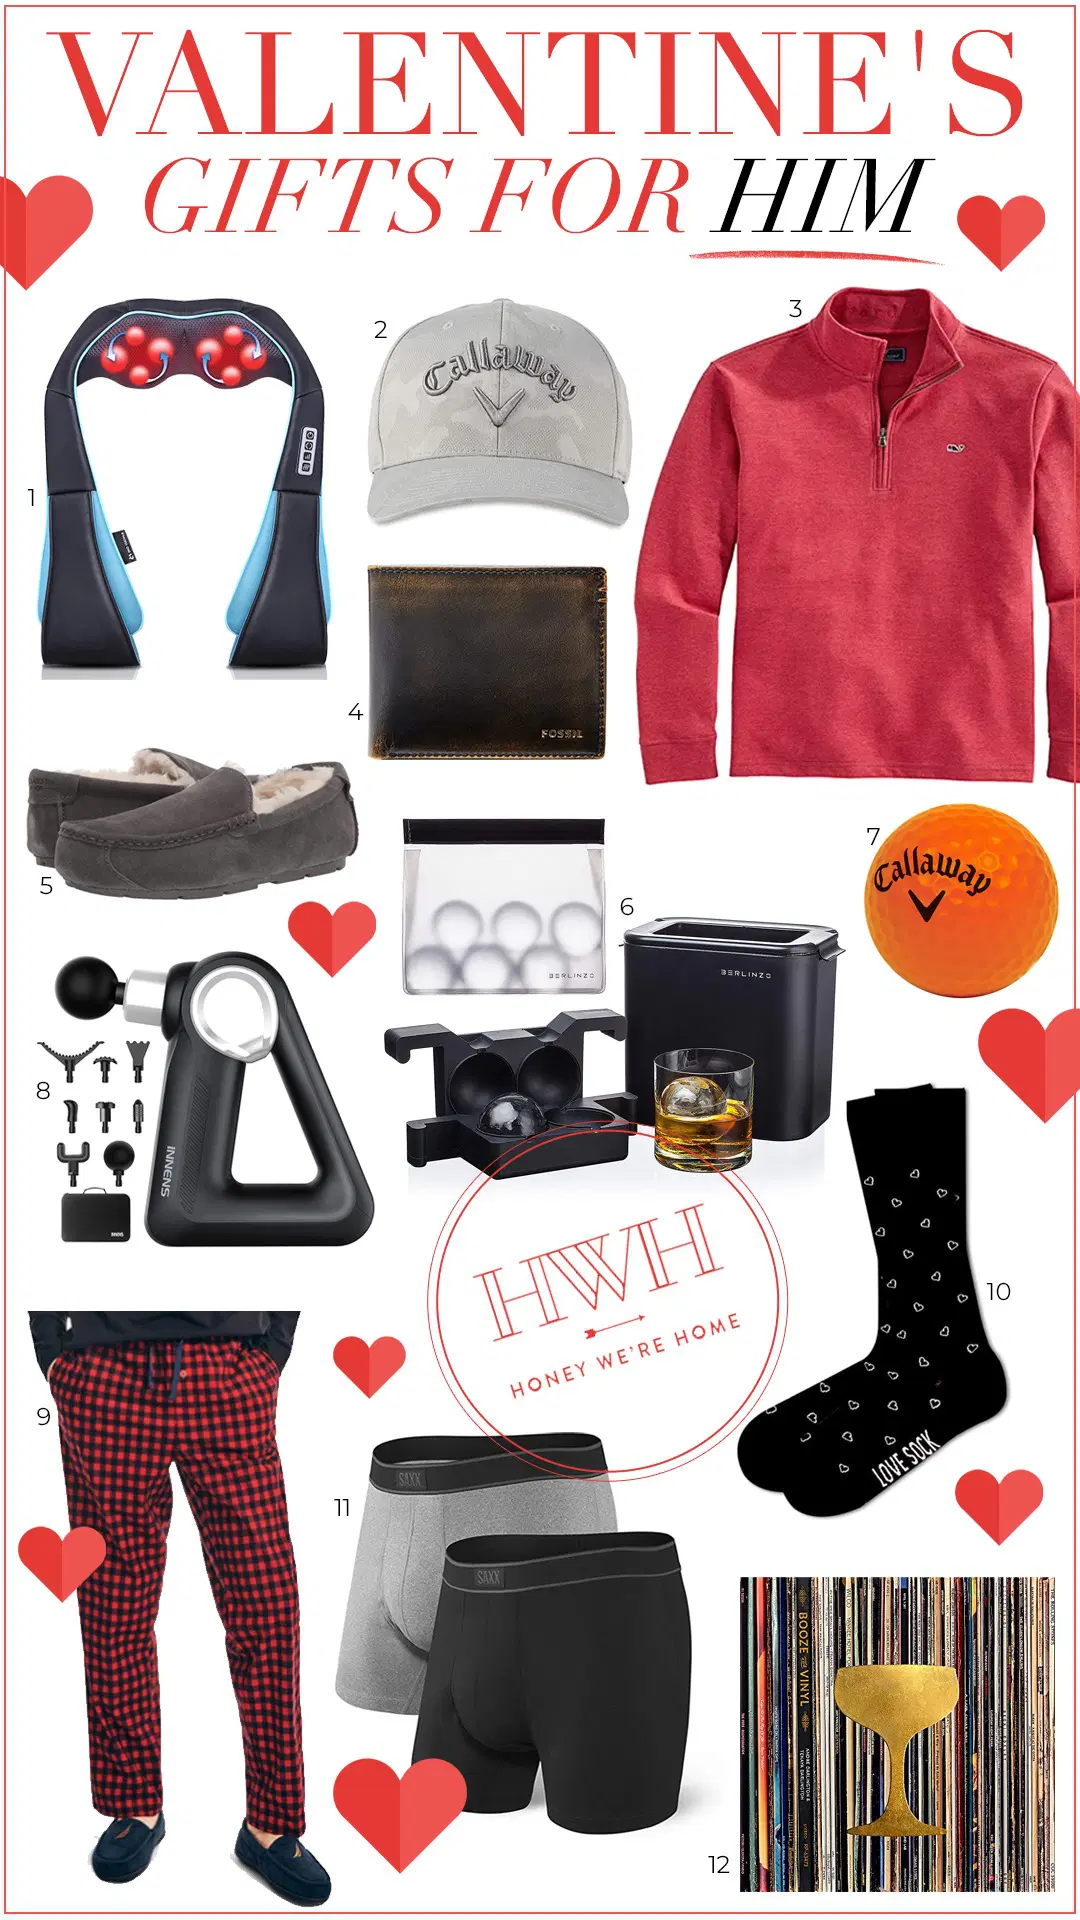 Valentine’s Gifts for Him & Kids